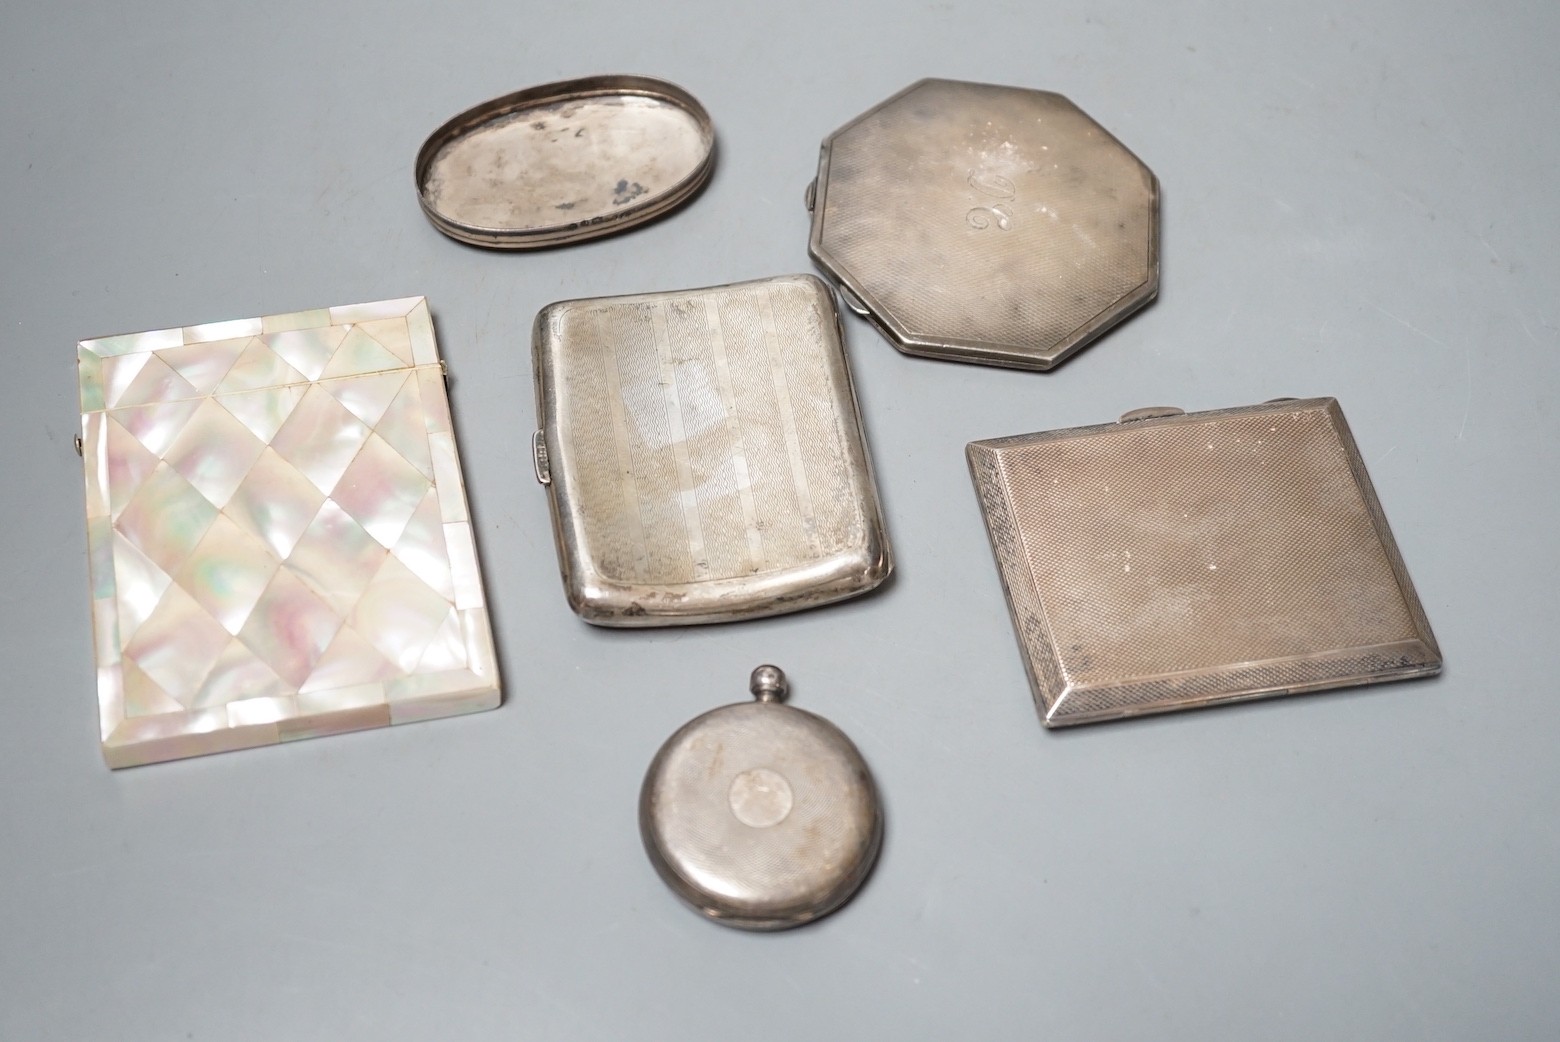 A 1920's silver and enamelled cigarette case, a 1930's silver and enamelled compact, a silver cigarette case, silver lid, silver pocket watch and a mother of pearl card case.